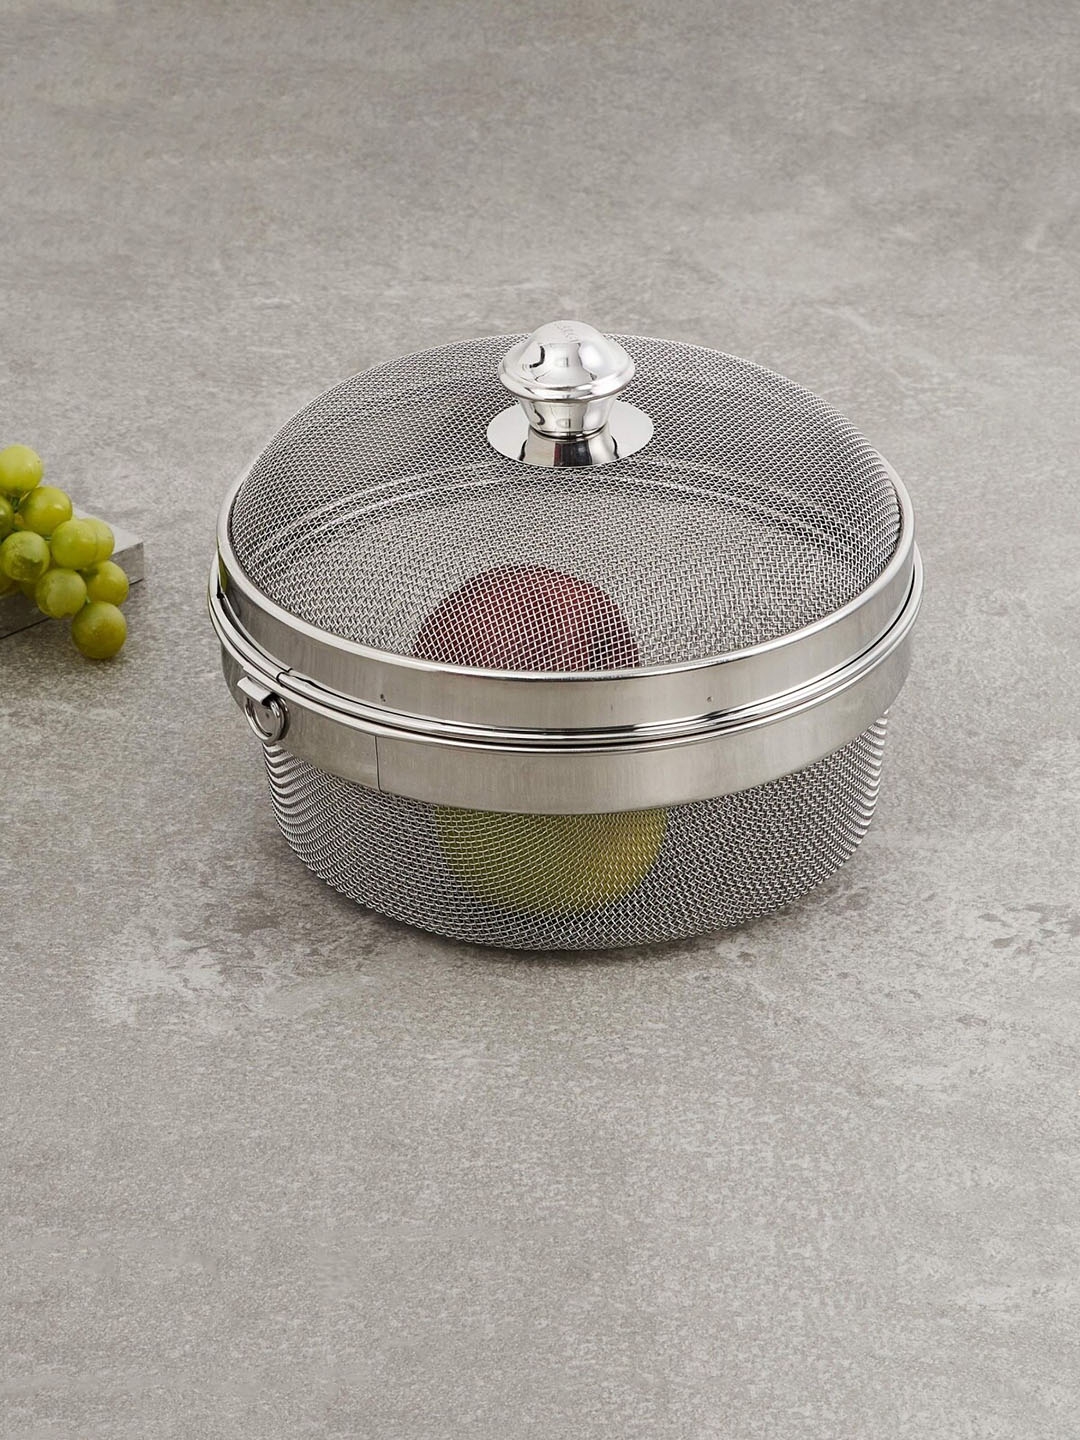 Home Centre Silver-Toned Solid Stainless Steel Multi-Utility Basket